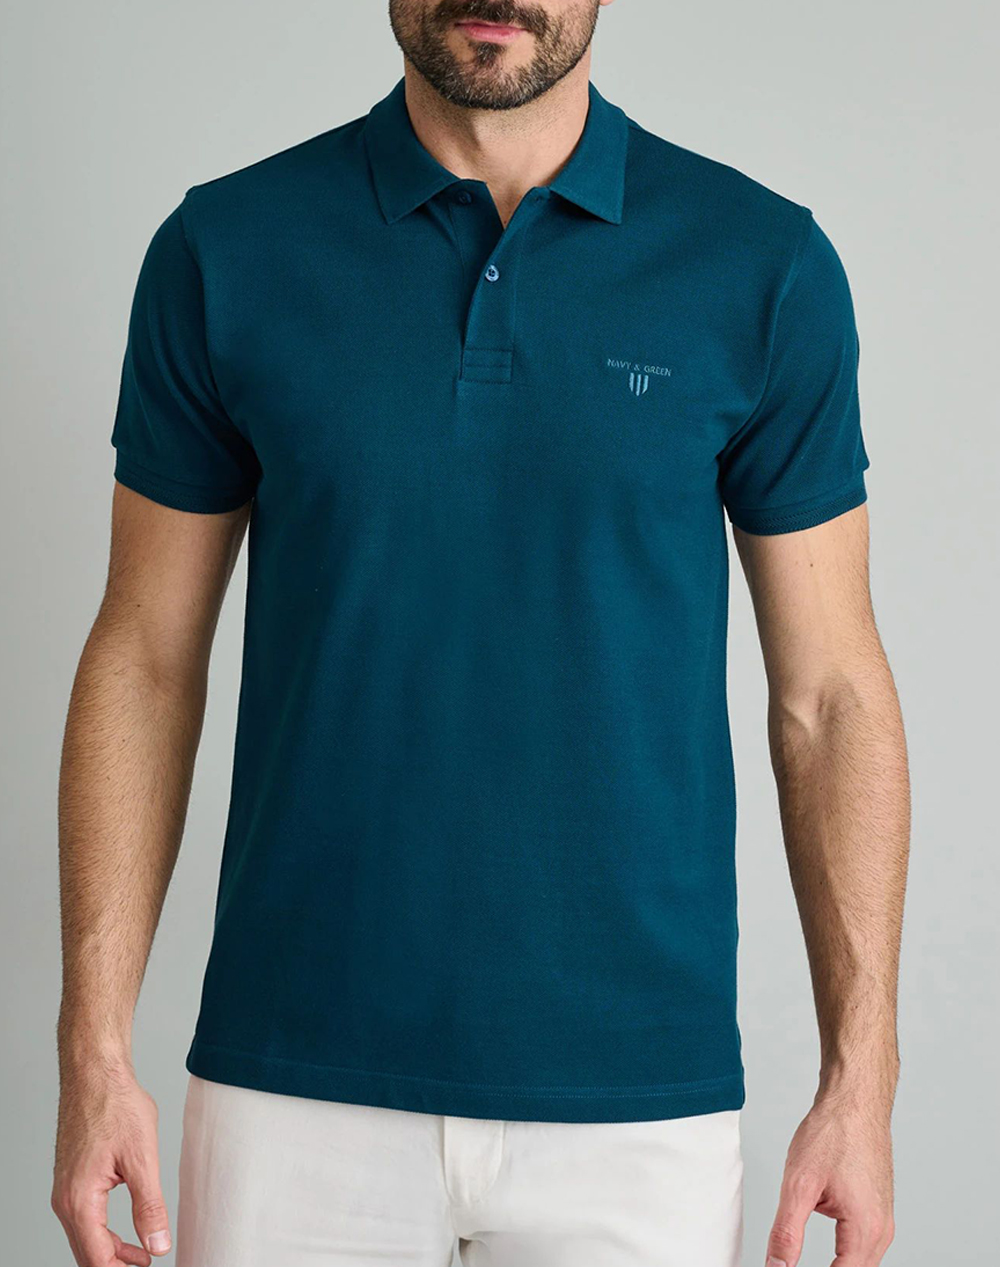 NAVY&GREEN POLO ΜΠΛΟΥΖΑΚΙ-YOUNG LINE 24EY.007/PL/YL-MOROCCAN BLUE Petrol